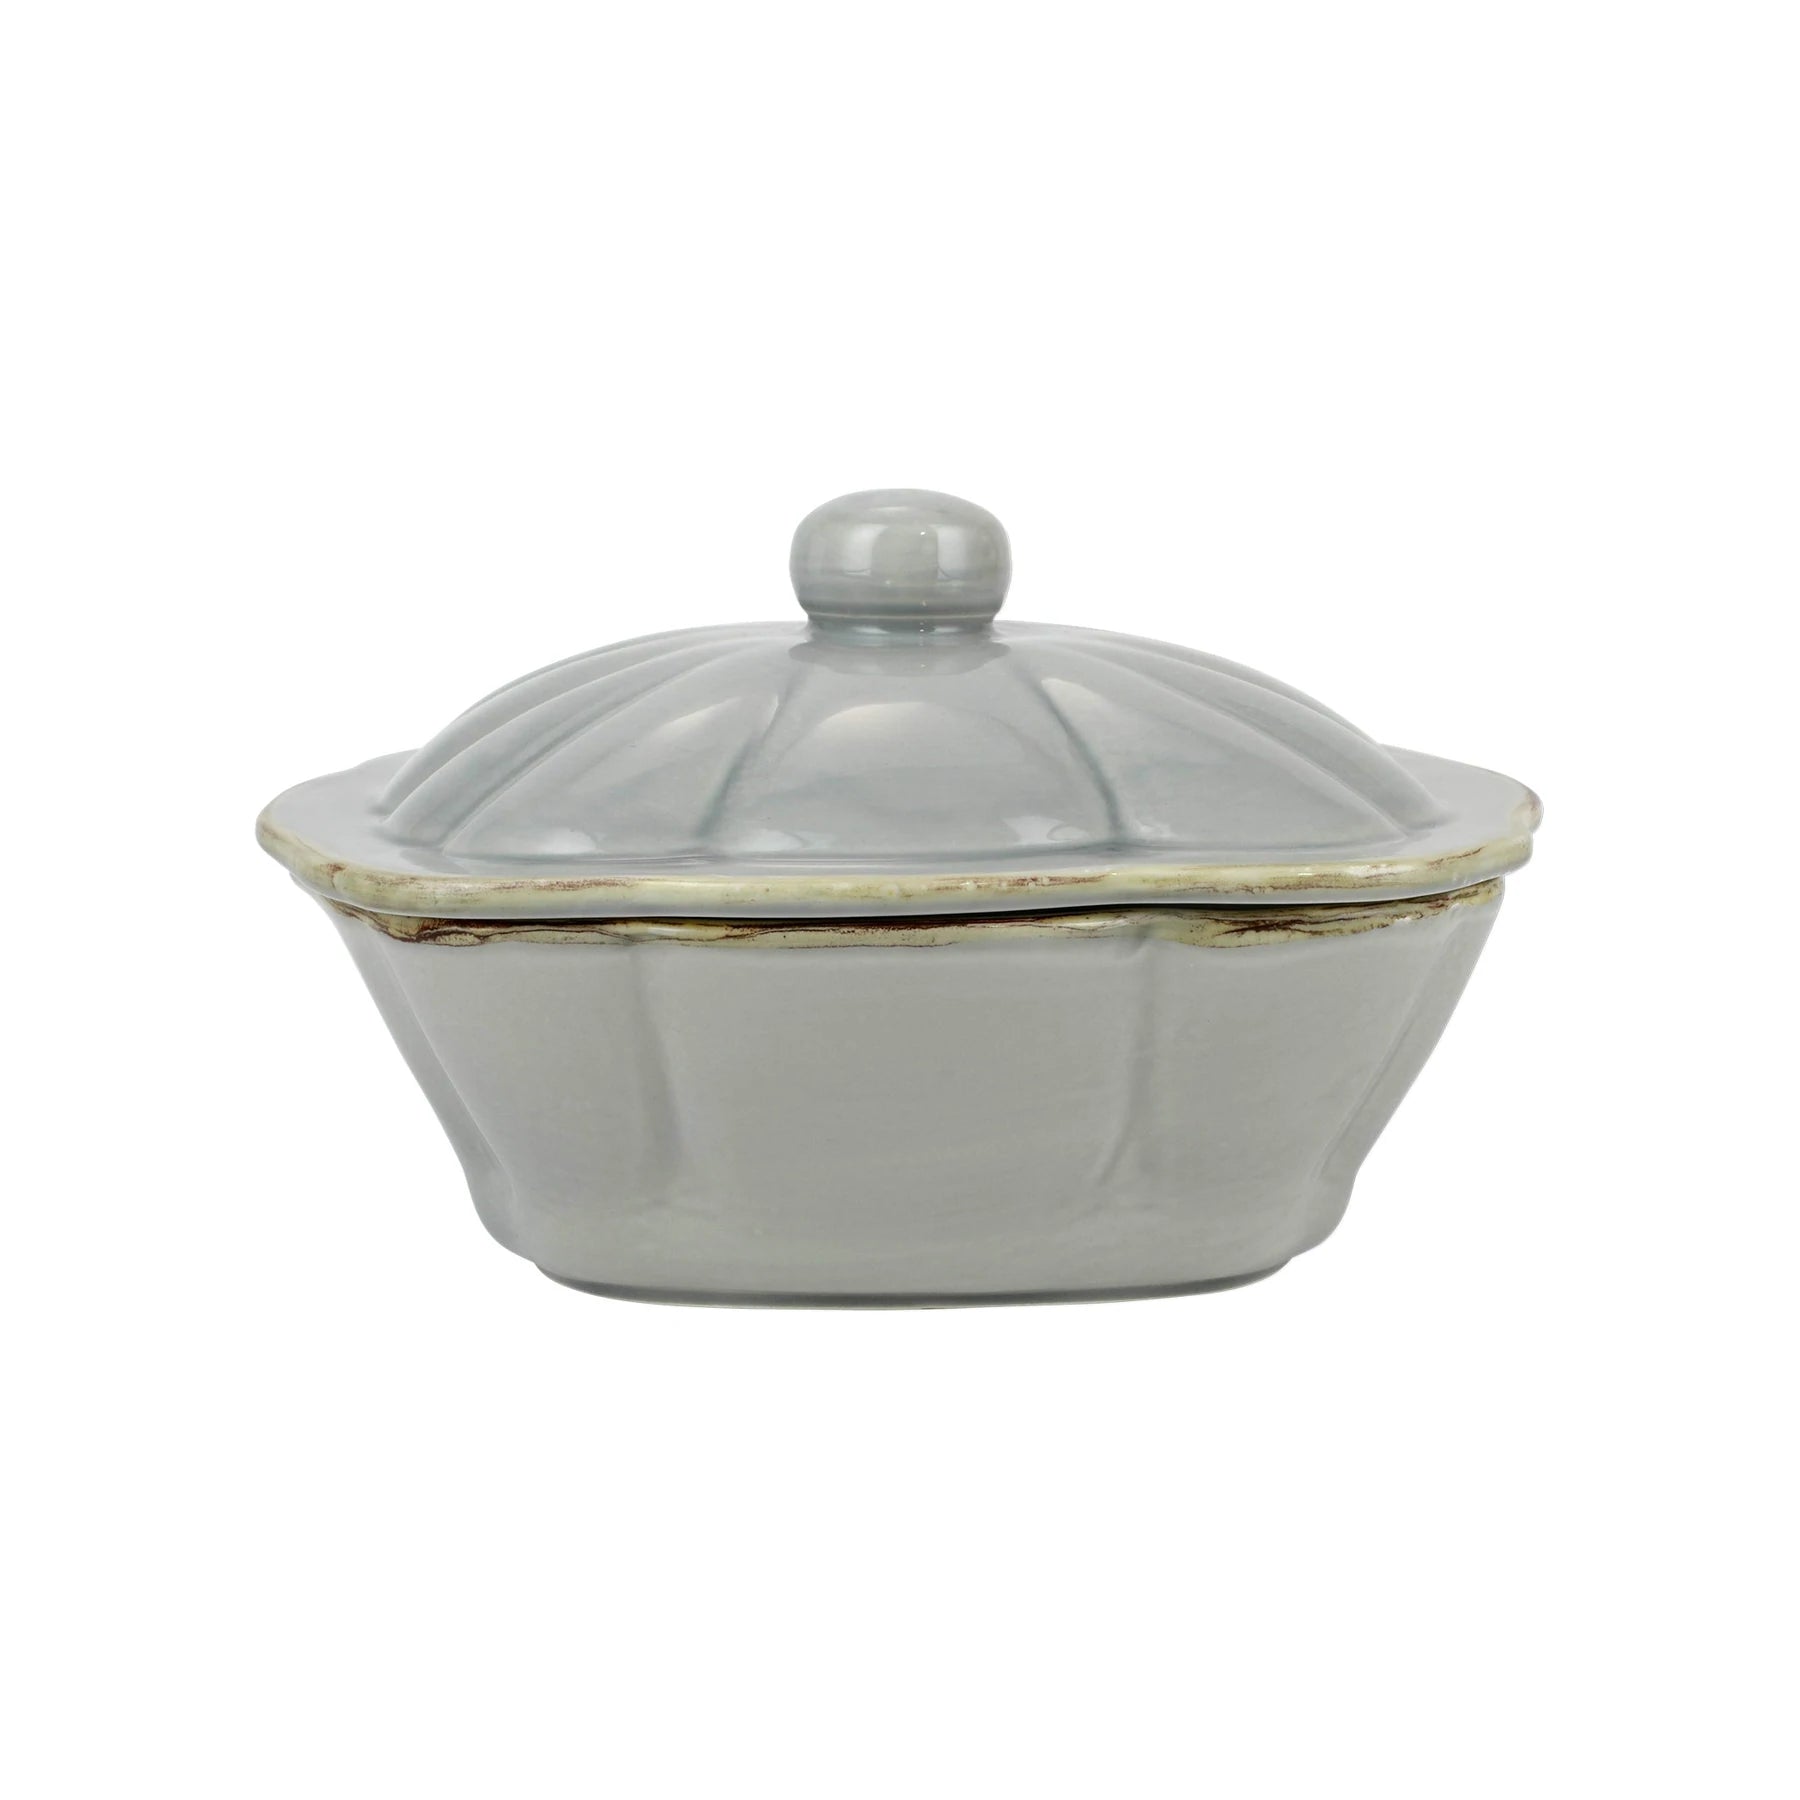 Italian Bakers Grey Square Covered Casserole Dish